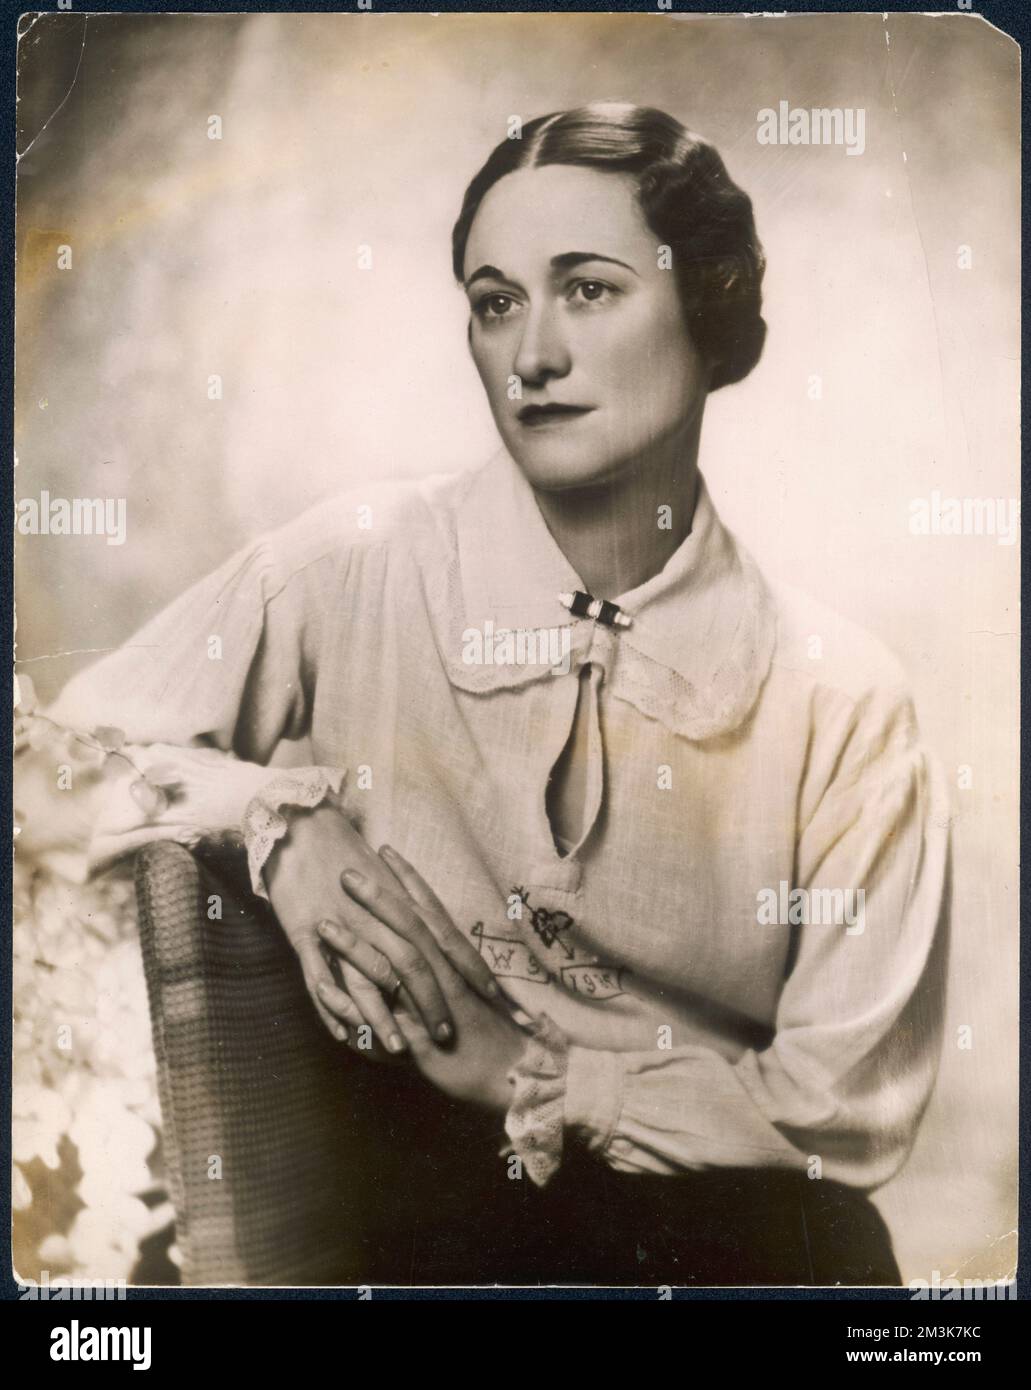 Bessie Wallis Warfield Simpson, later Duchess of Windsor (1896 - 1986), American socialite. Born in Blue Ridge Summit, Pennsylvania, she divorced her second husband, Ernest Simpson in order to marry Edward VIII who abdicated the throne in December 1936 to marry her. Stock Photo